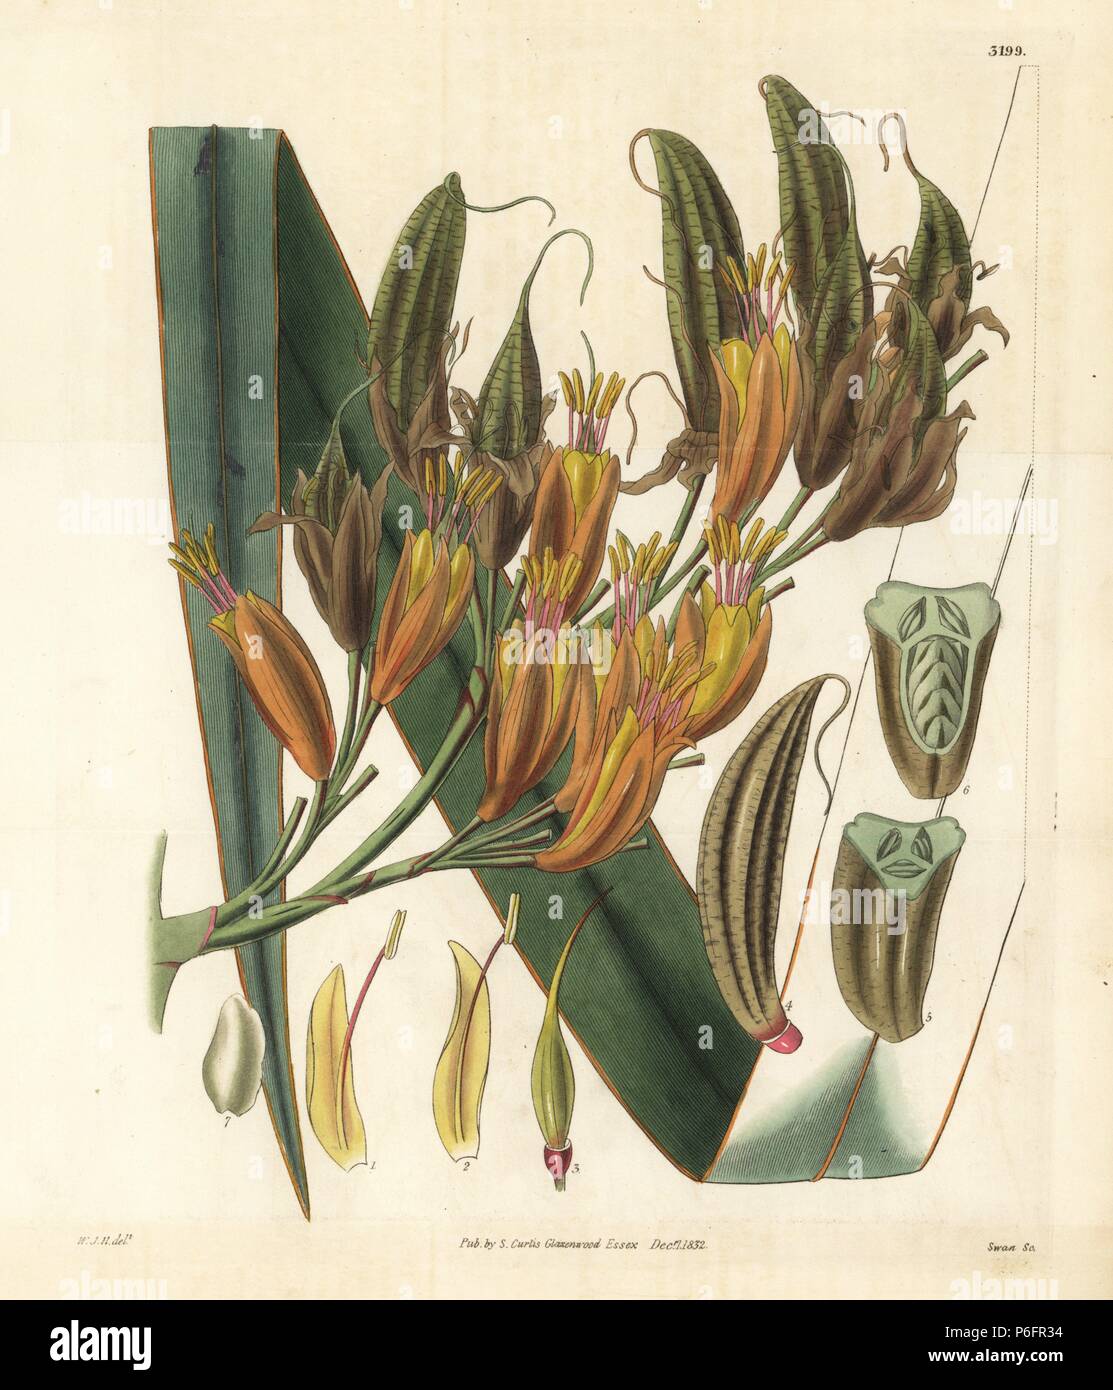 New Zealand flax or hemp, Phormium tenax. Handcoloured copperplate engraving by Swan after an illustration by William Jackson Hooker from Samuel Curtis' 'Botanical Magazine,' London, 1832. Stock Photo